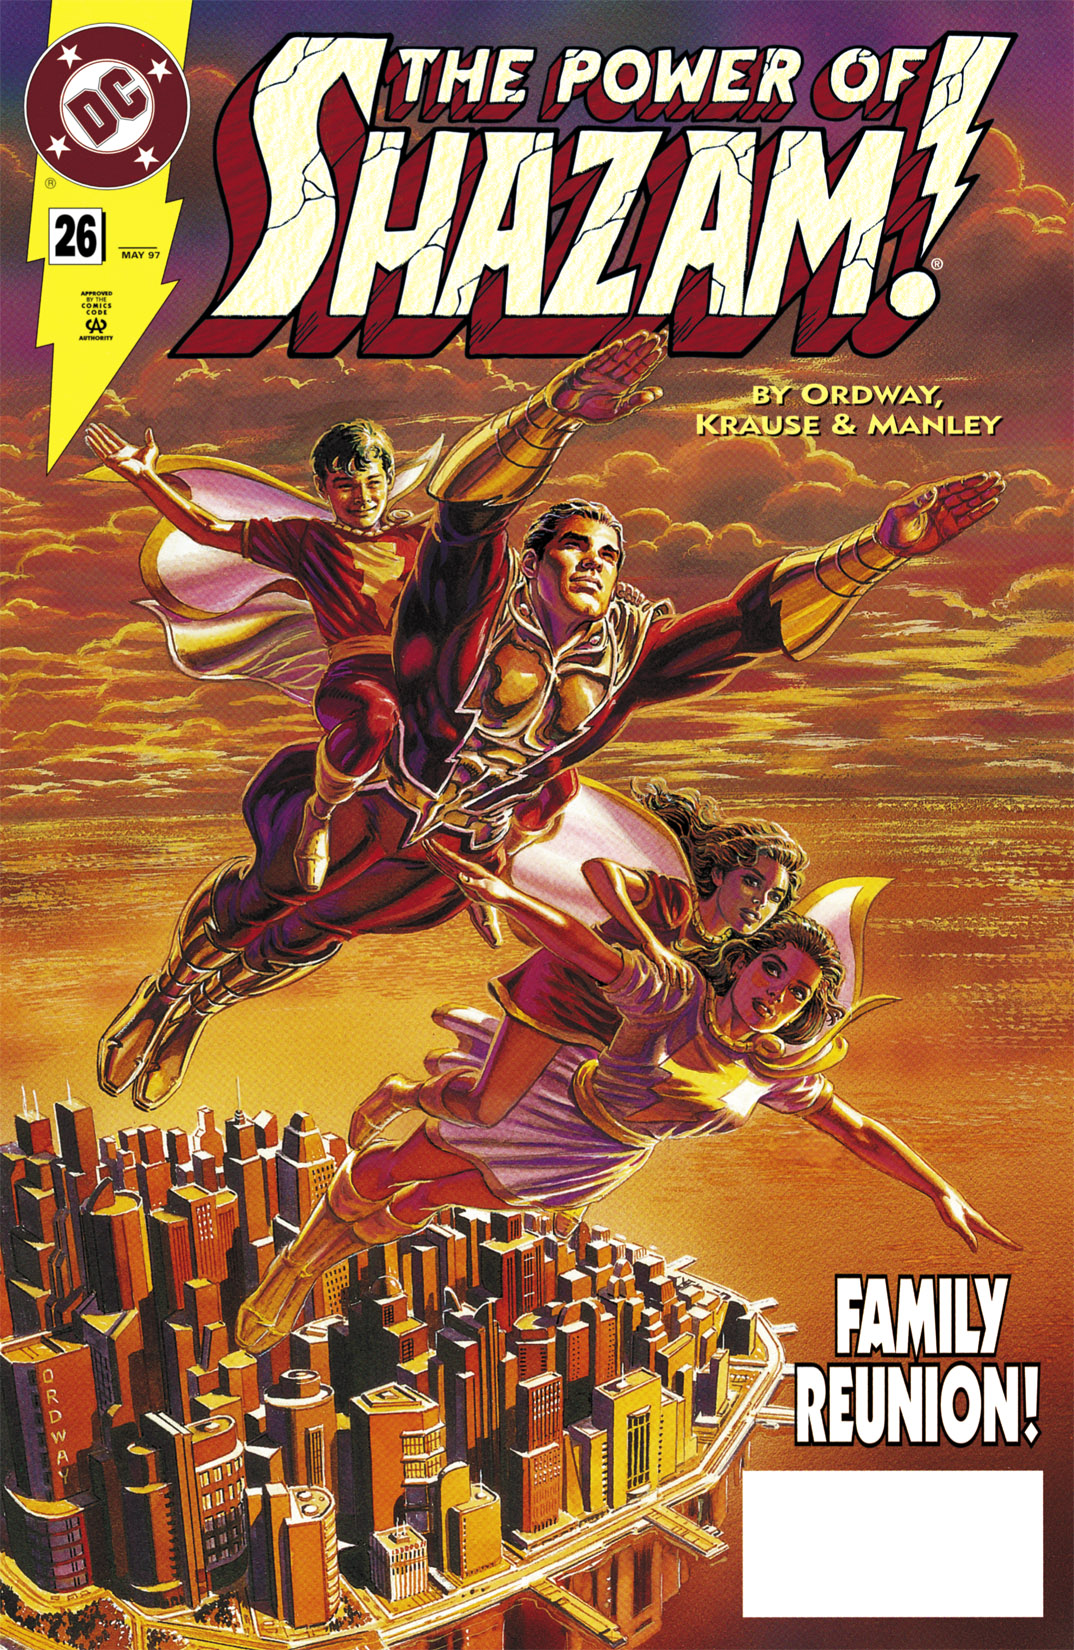 Read online The Power of SHAZAM! comic -  Issue #26 - 1